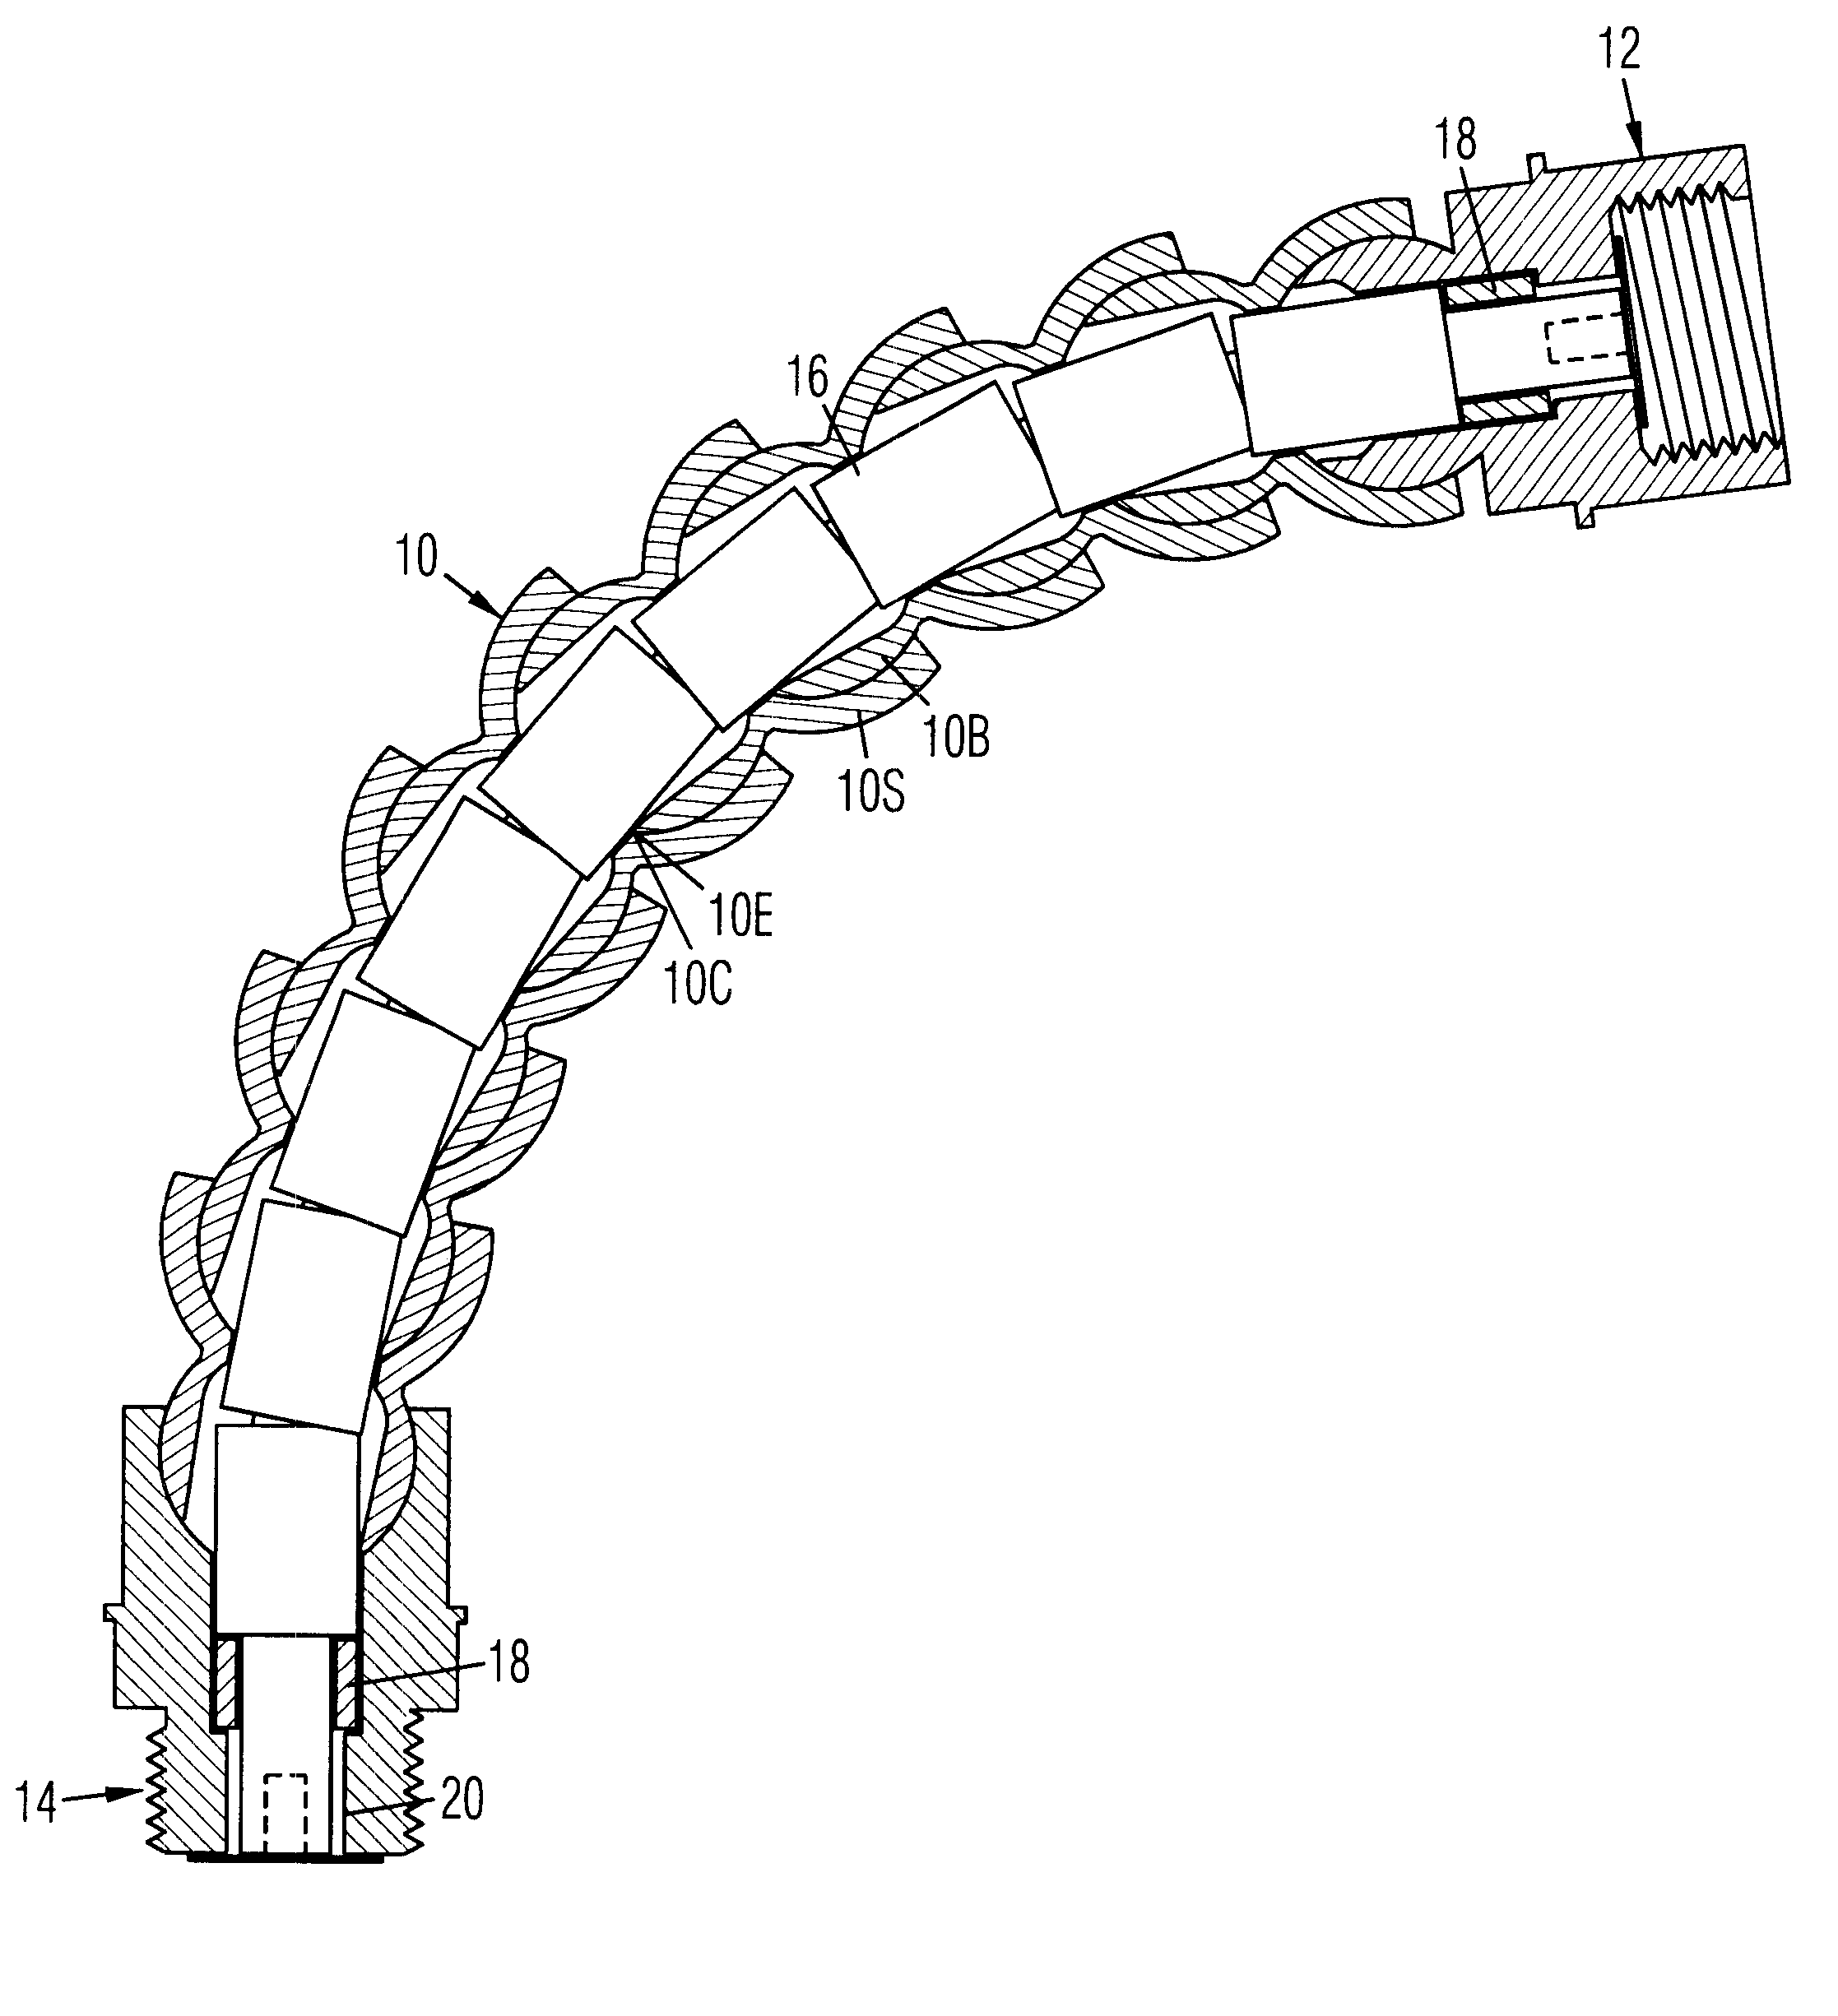 Flexible sectioned arm with internal overbending-prevention sleeves